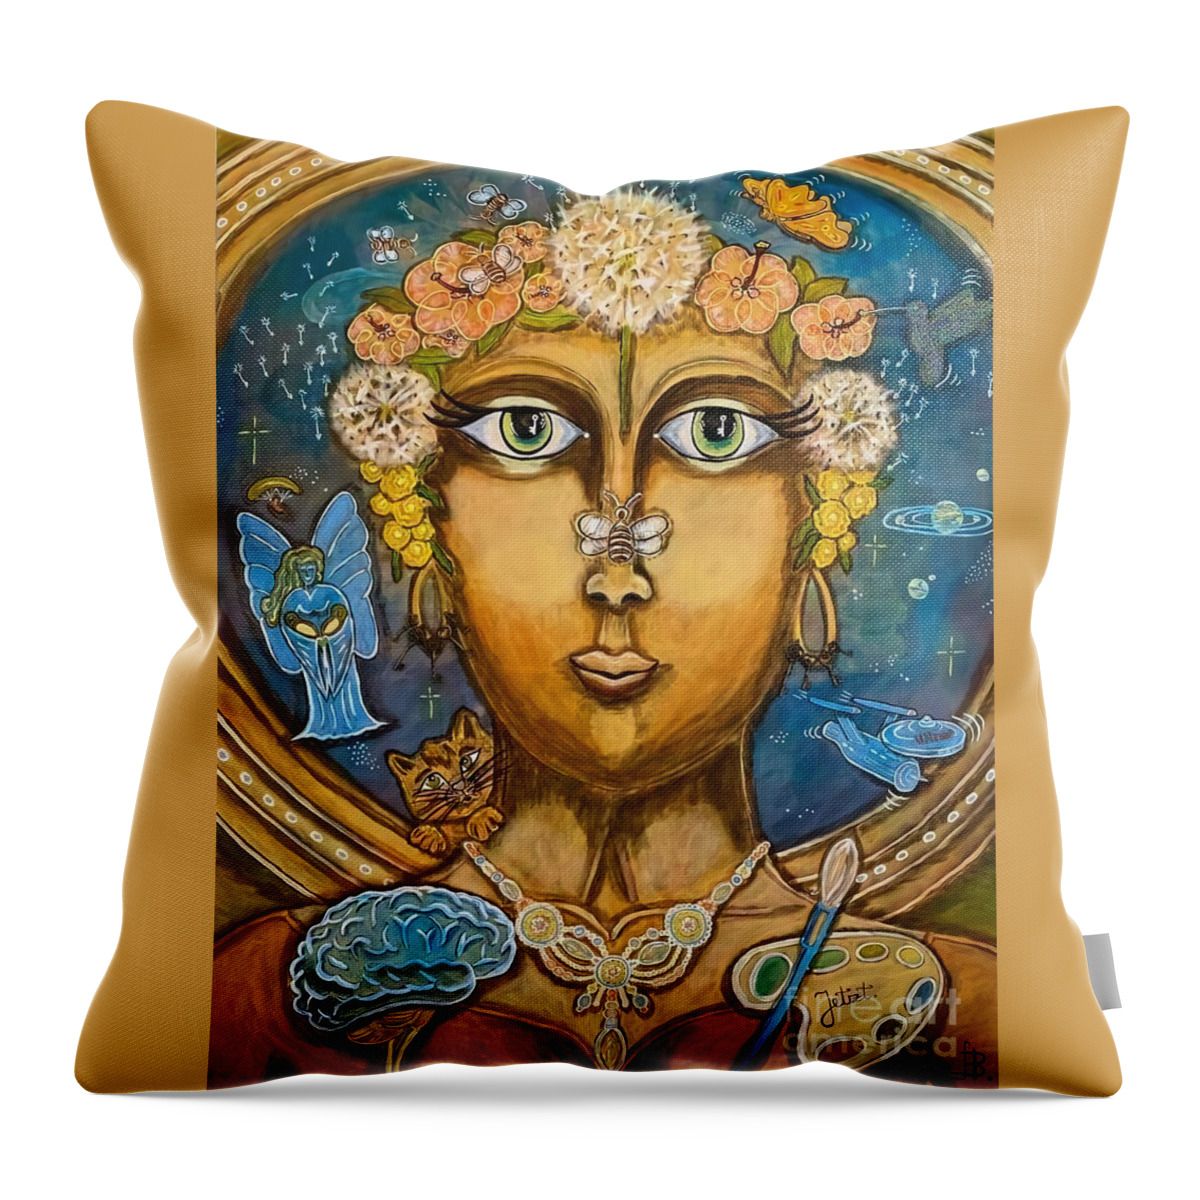 Archetypal Portrait Throw Pillow featuring the mixed media Pusteblume Dandelion by Sylvia Becker-Hill